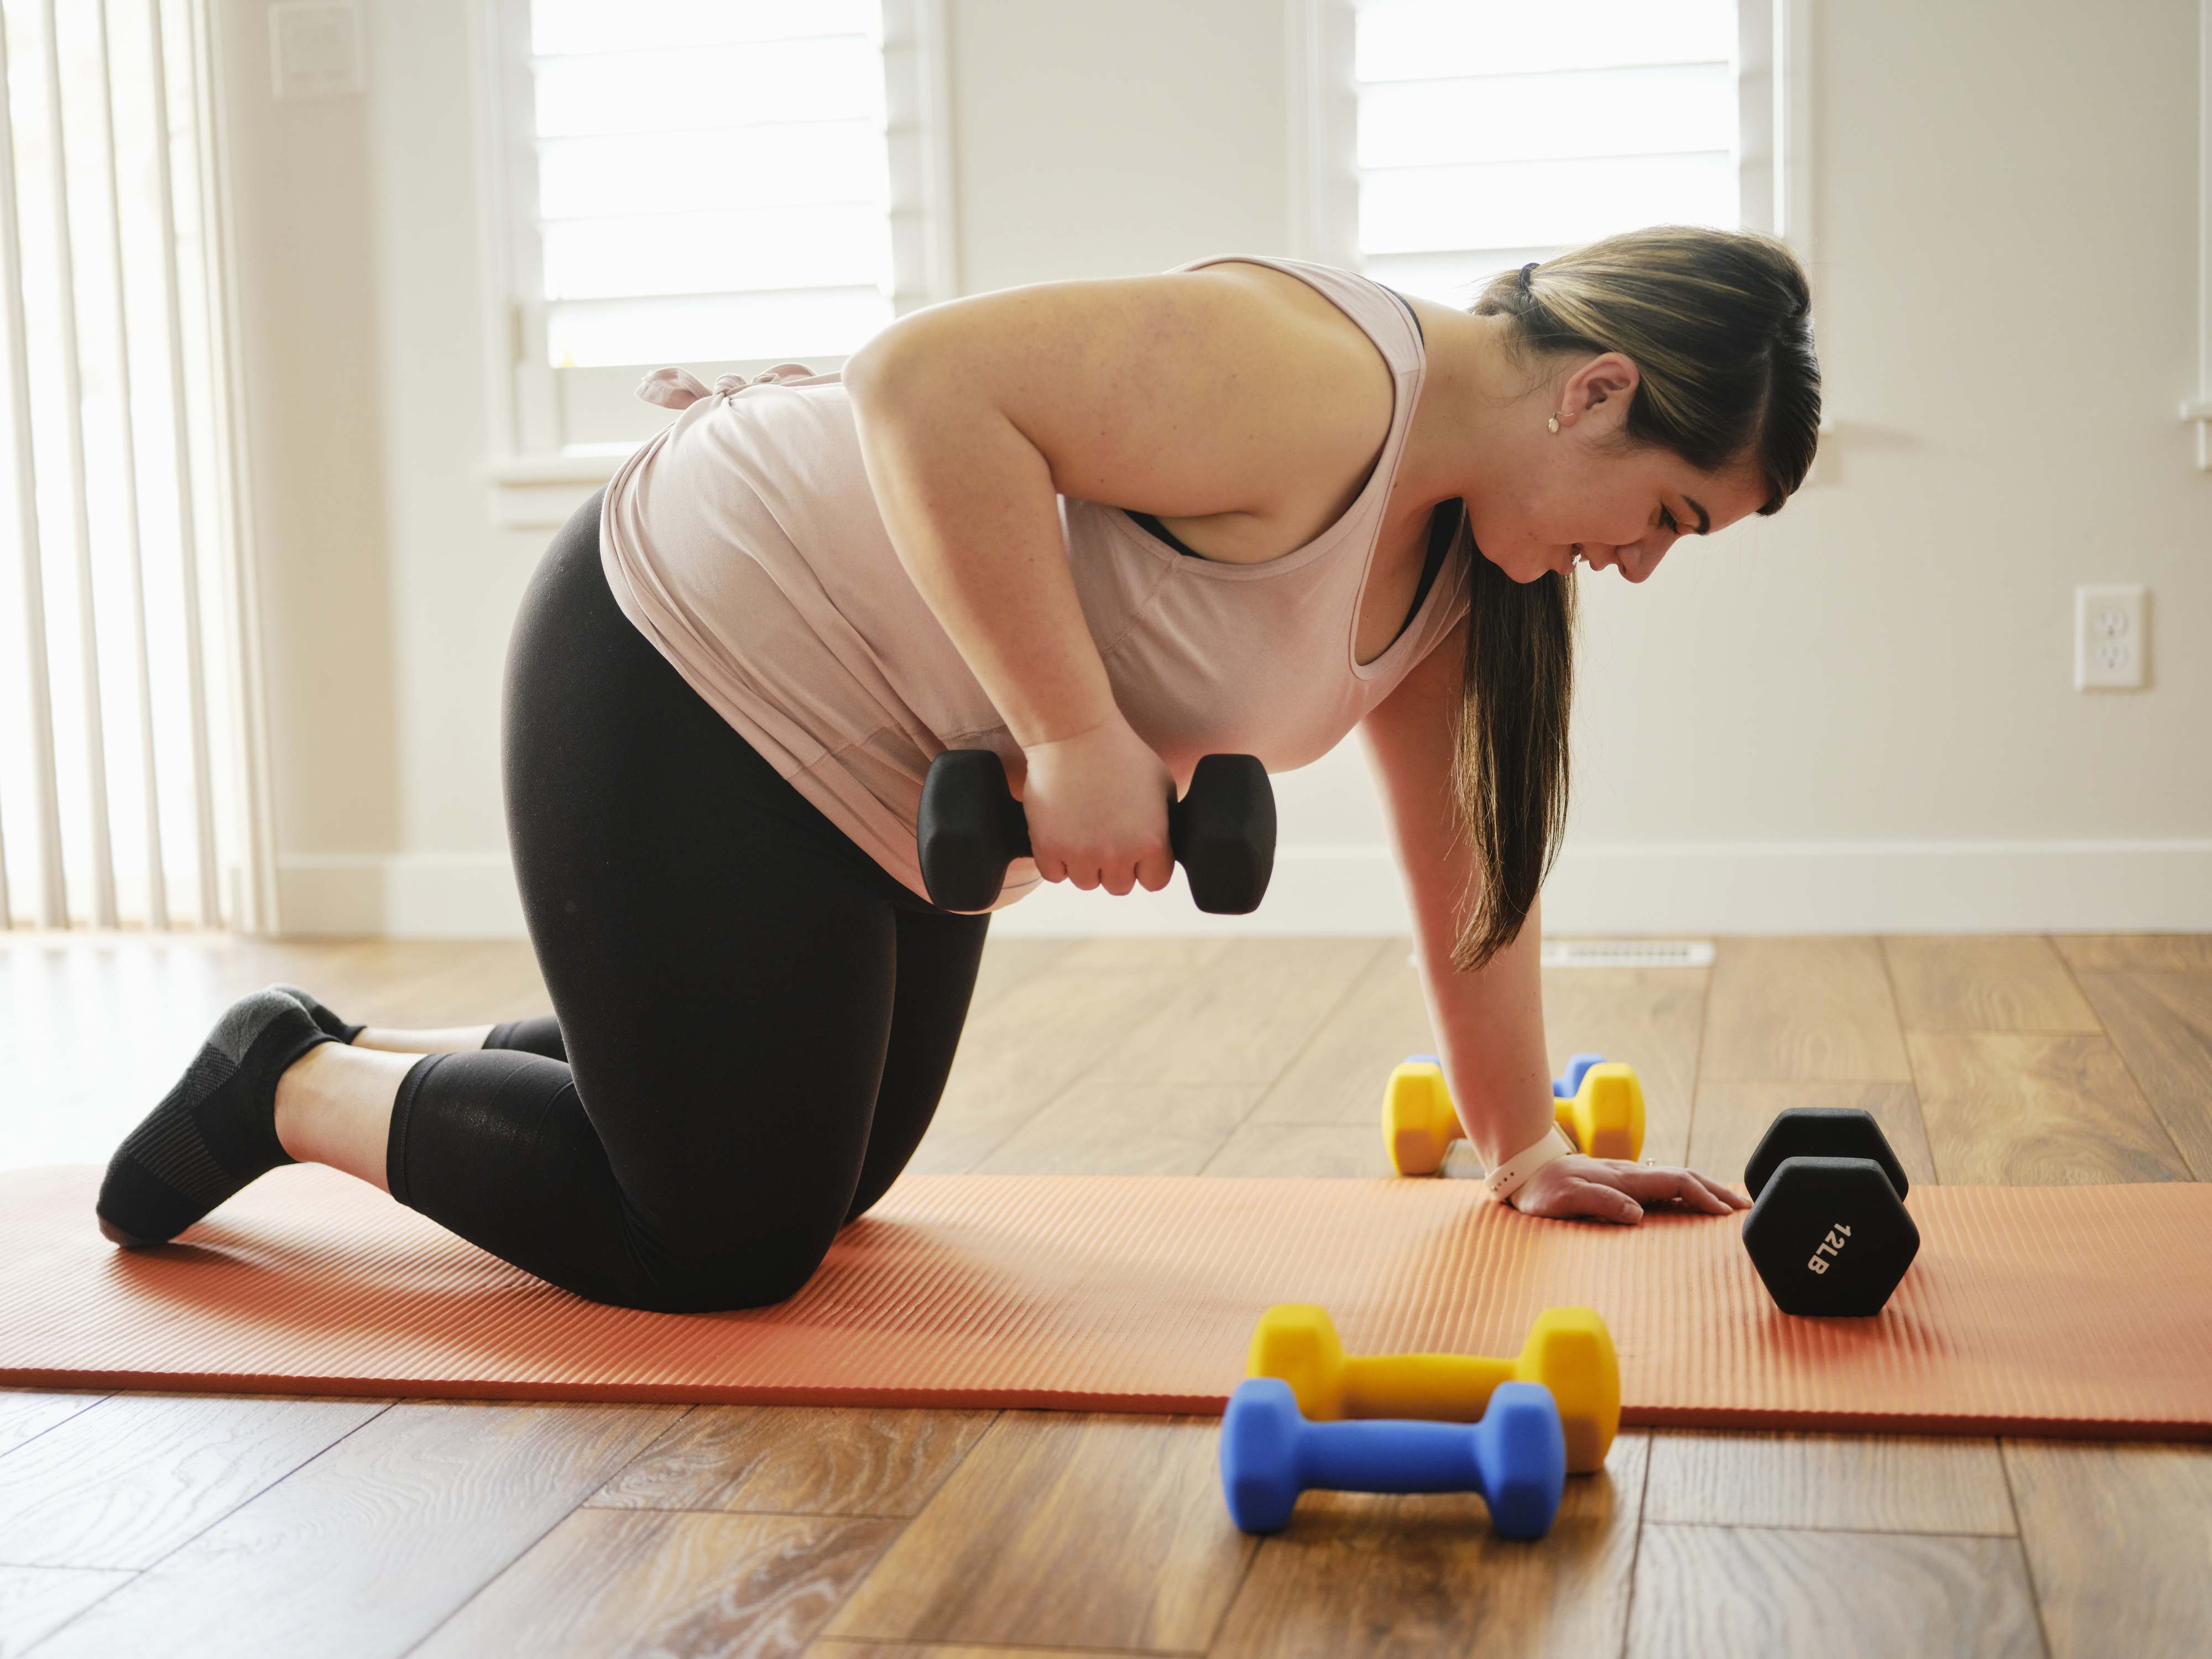 A woman exercising at home with hand weights